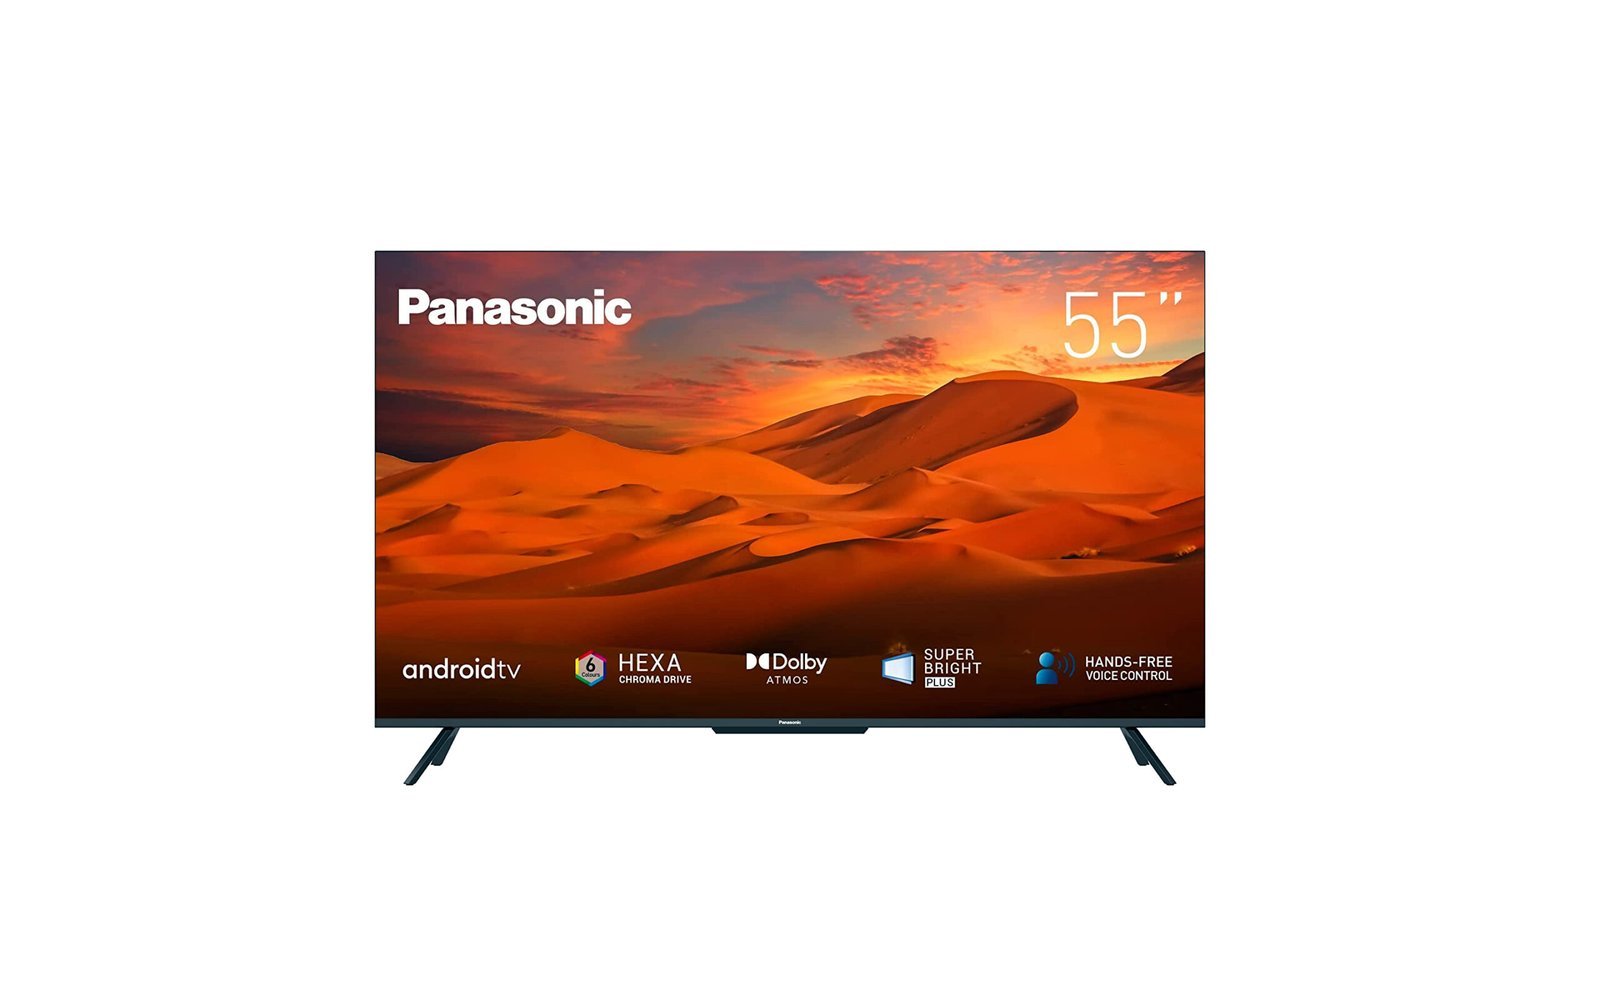 Panasonic 55 Inch Android Smart TV Color Black Model- TH-55JX850M | 1 Year Warranty